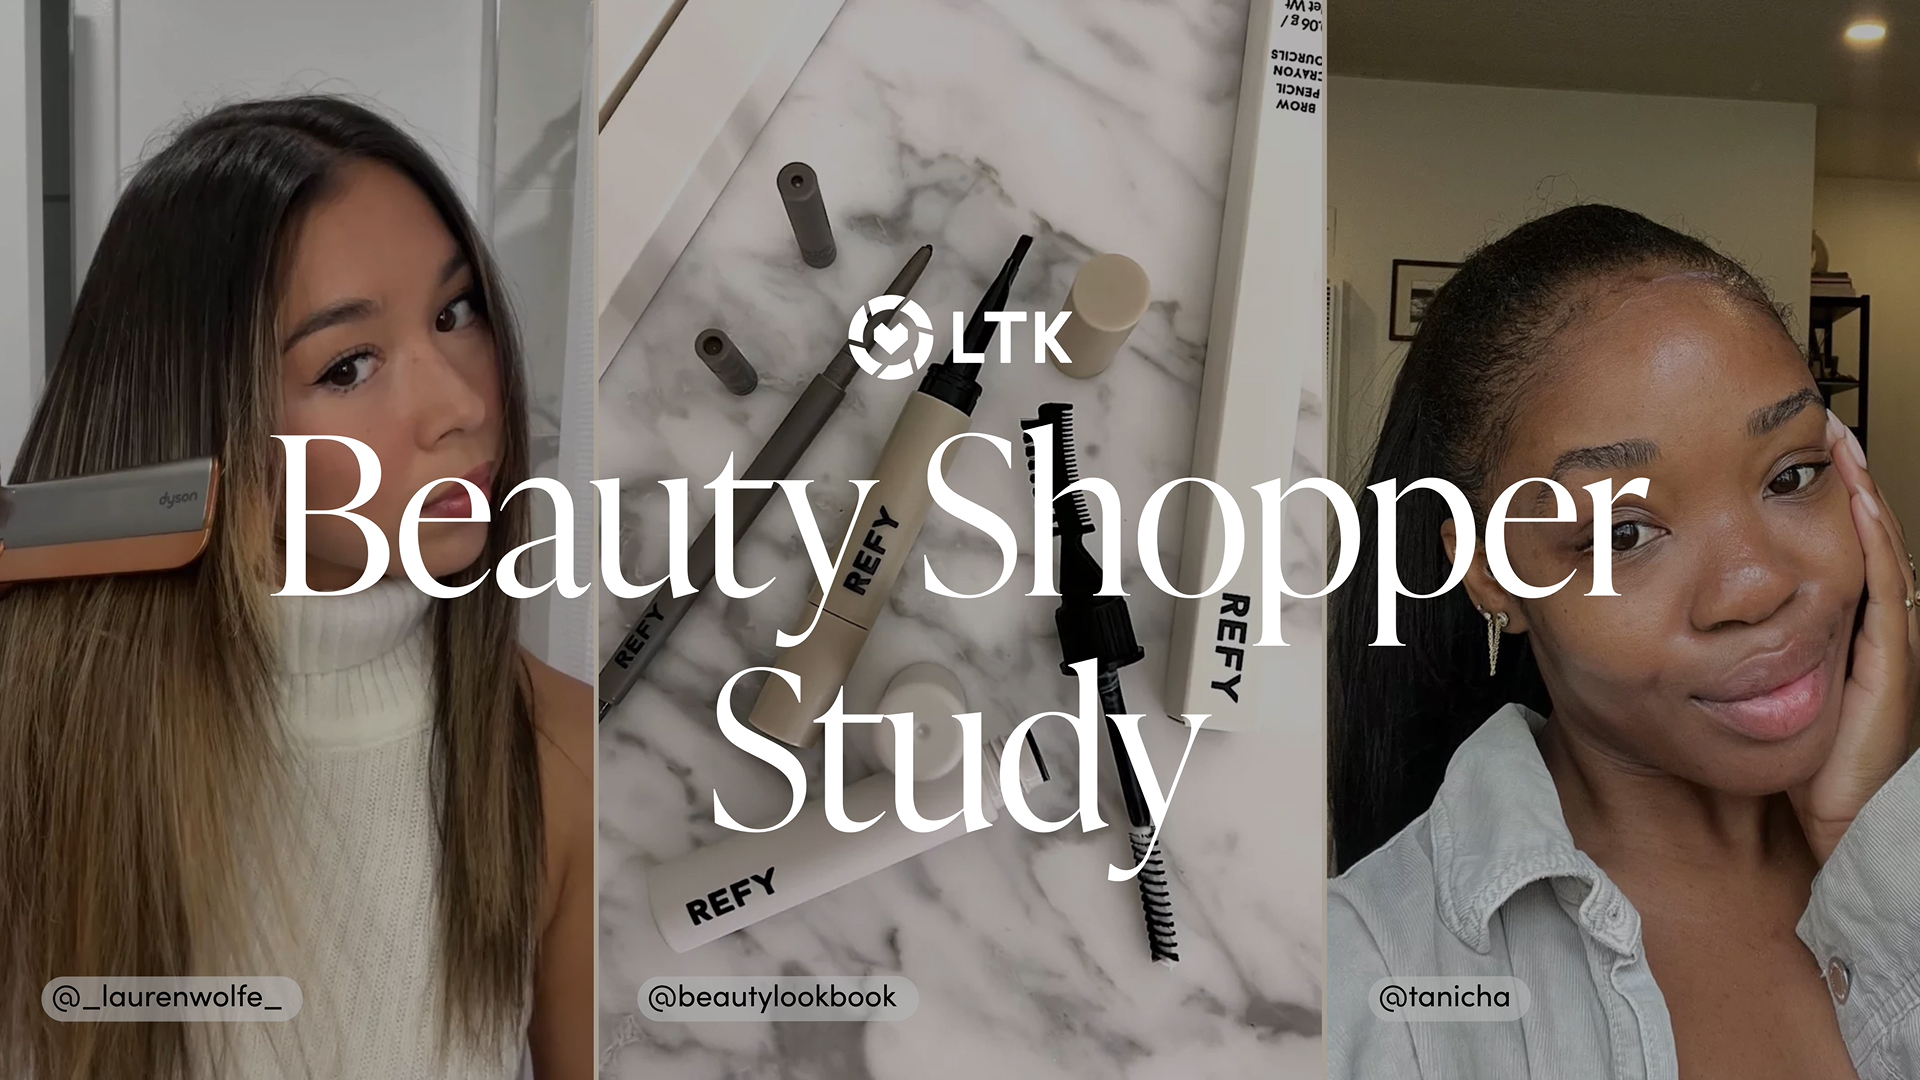 The LTK  Beauty Shopper Study showcases how consumers turn to creators as their most trusted source when it comes to beauty recommendations. Even when compared to trusted traditional sources, Gen Z and Millennials prefer creator content over retailer websites, social media ads and celebrities.